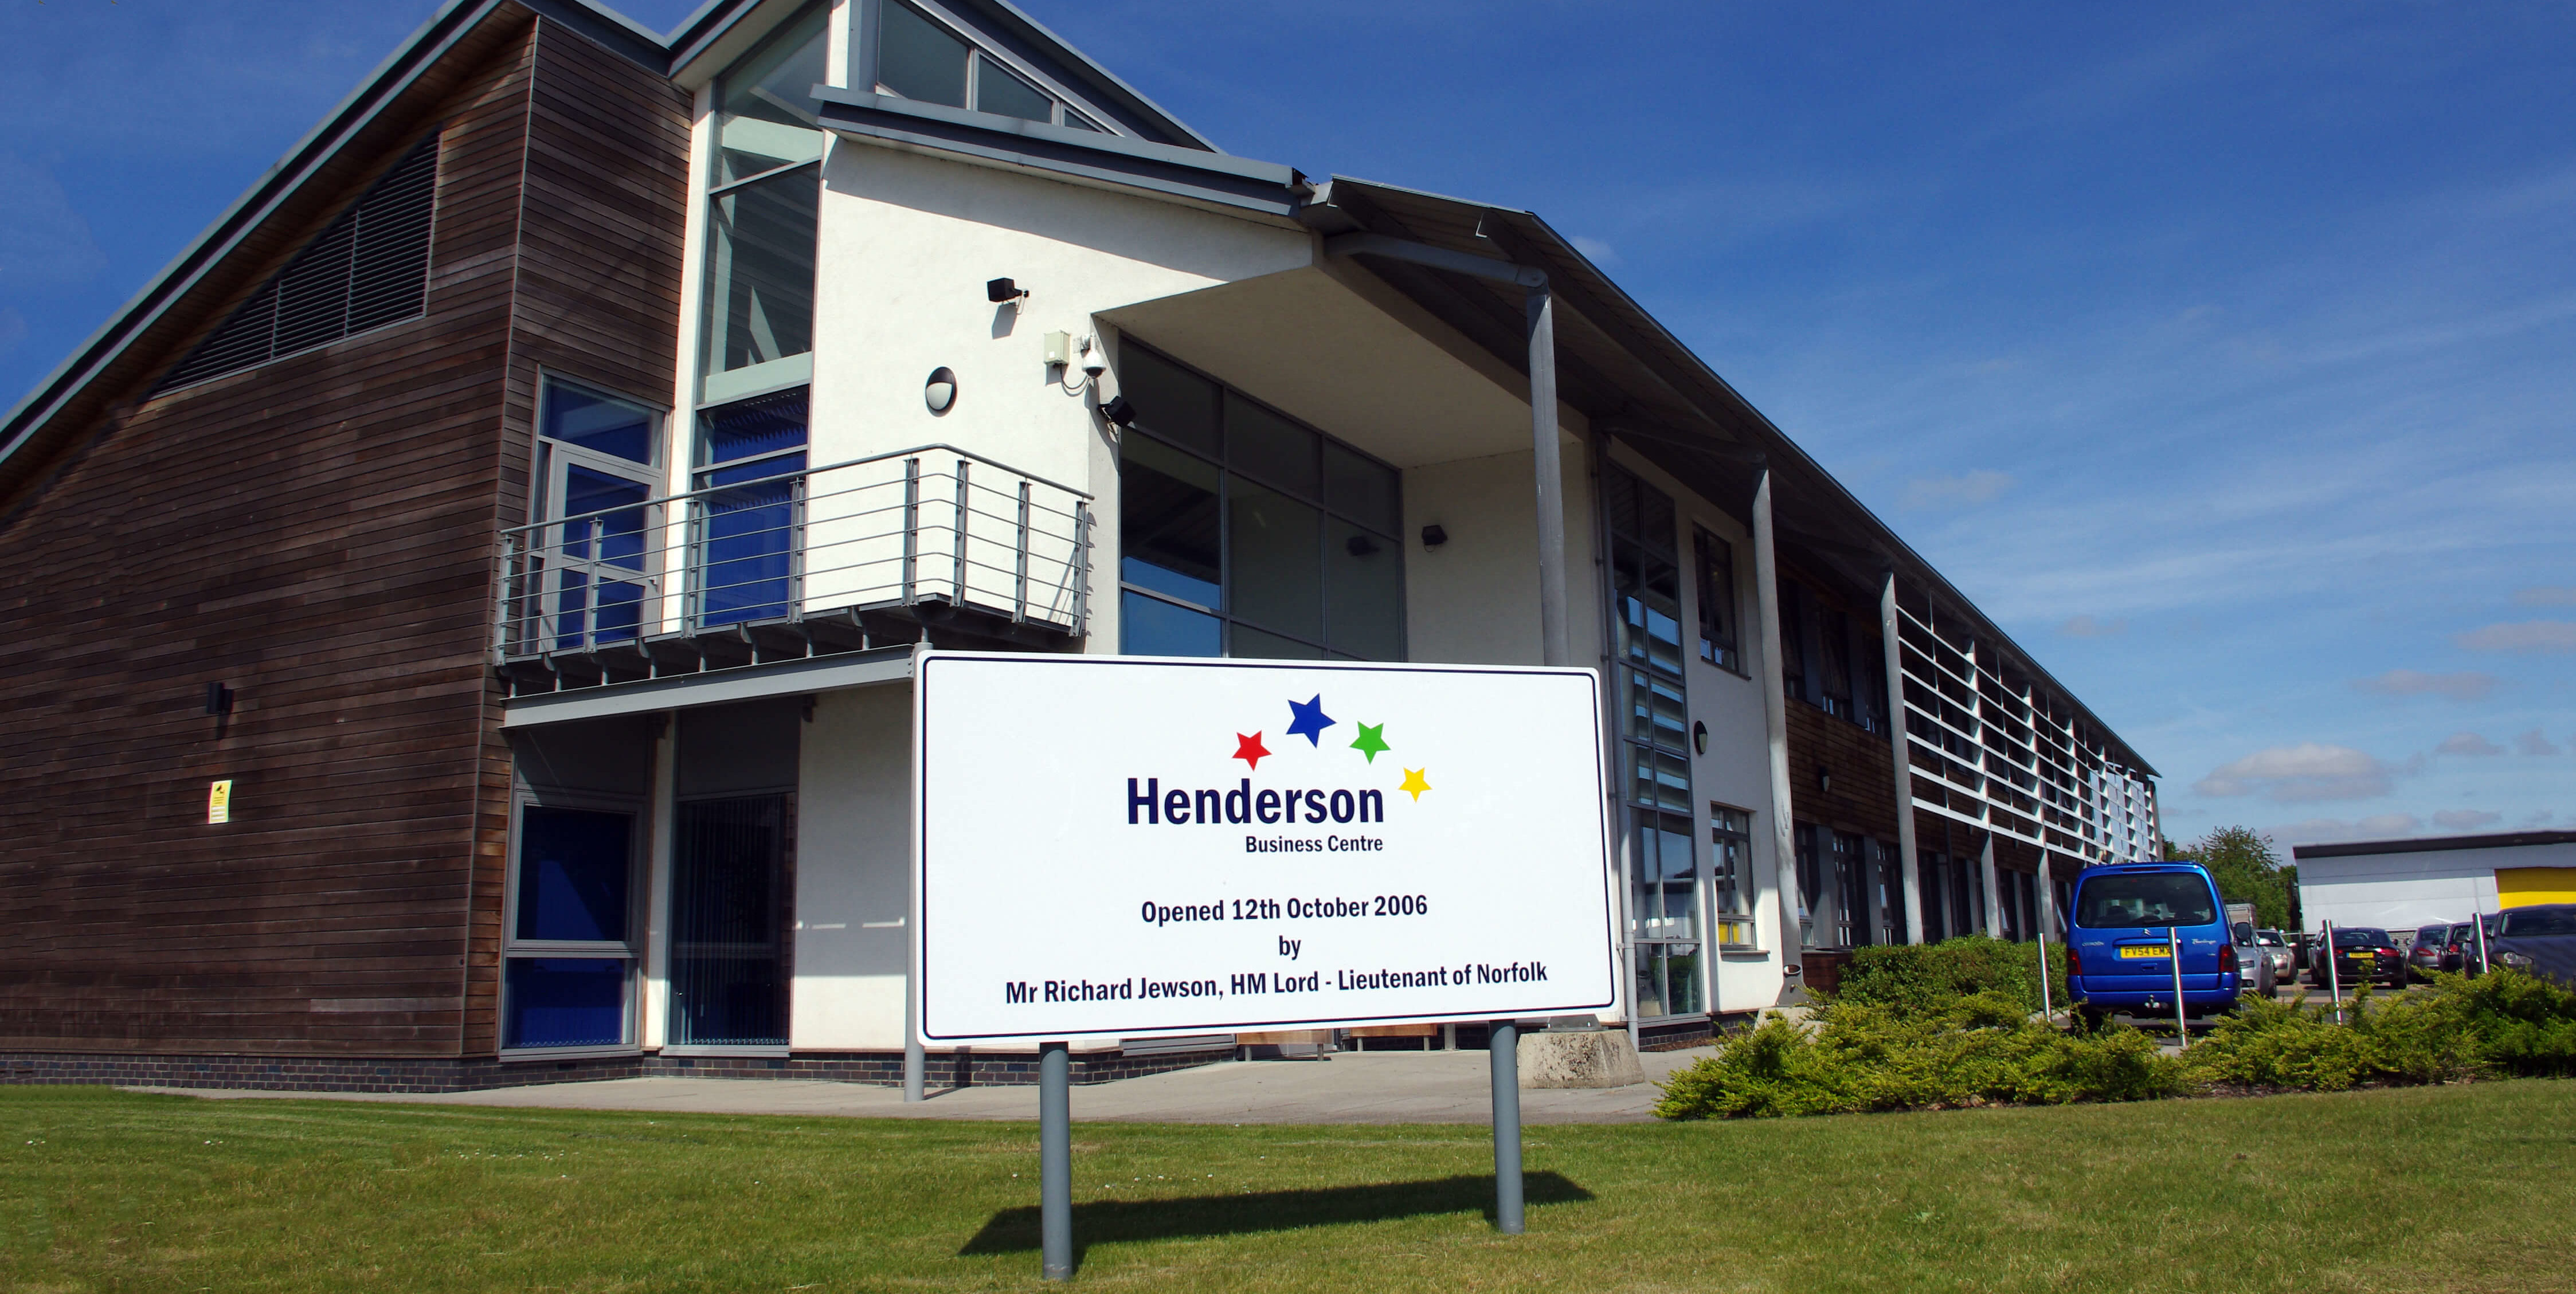 Henderson Business Centre Building and sign